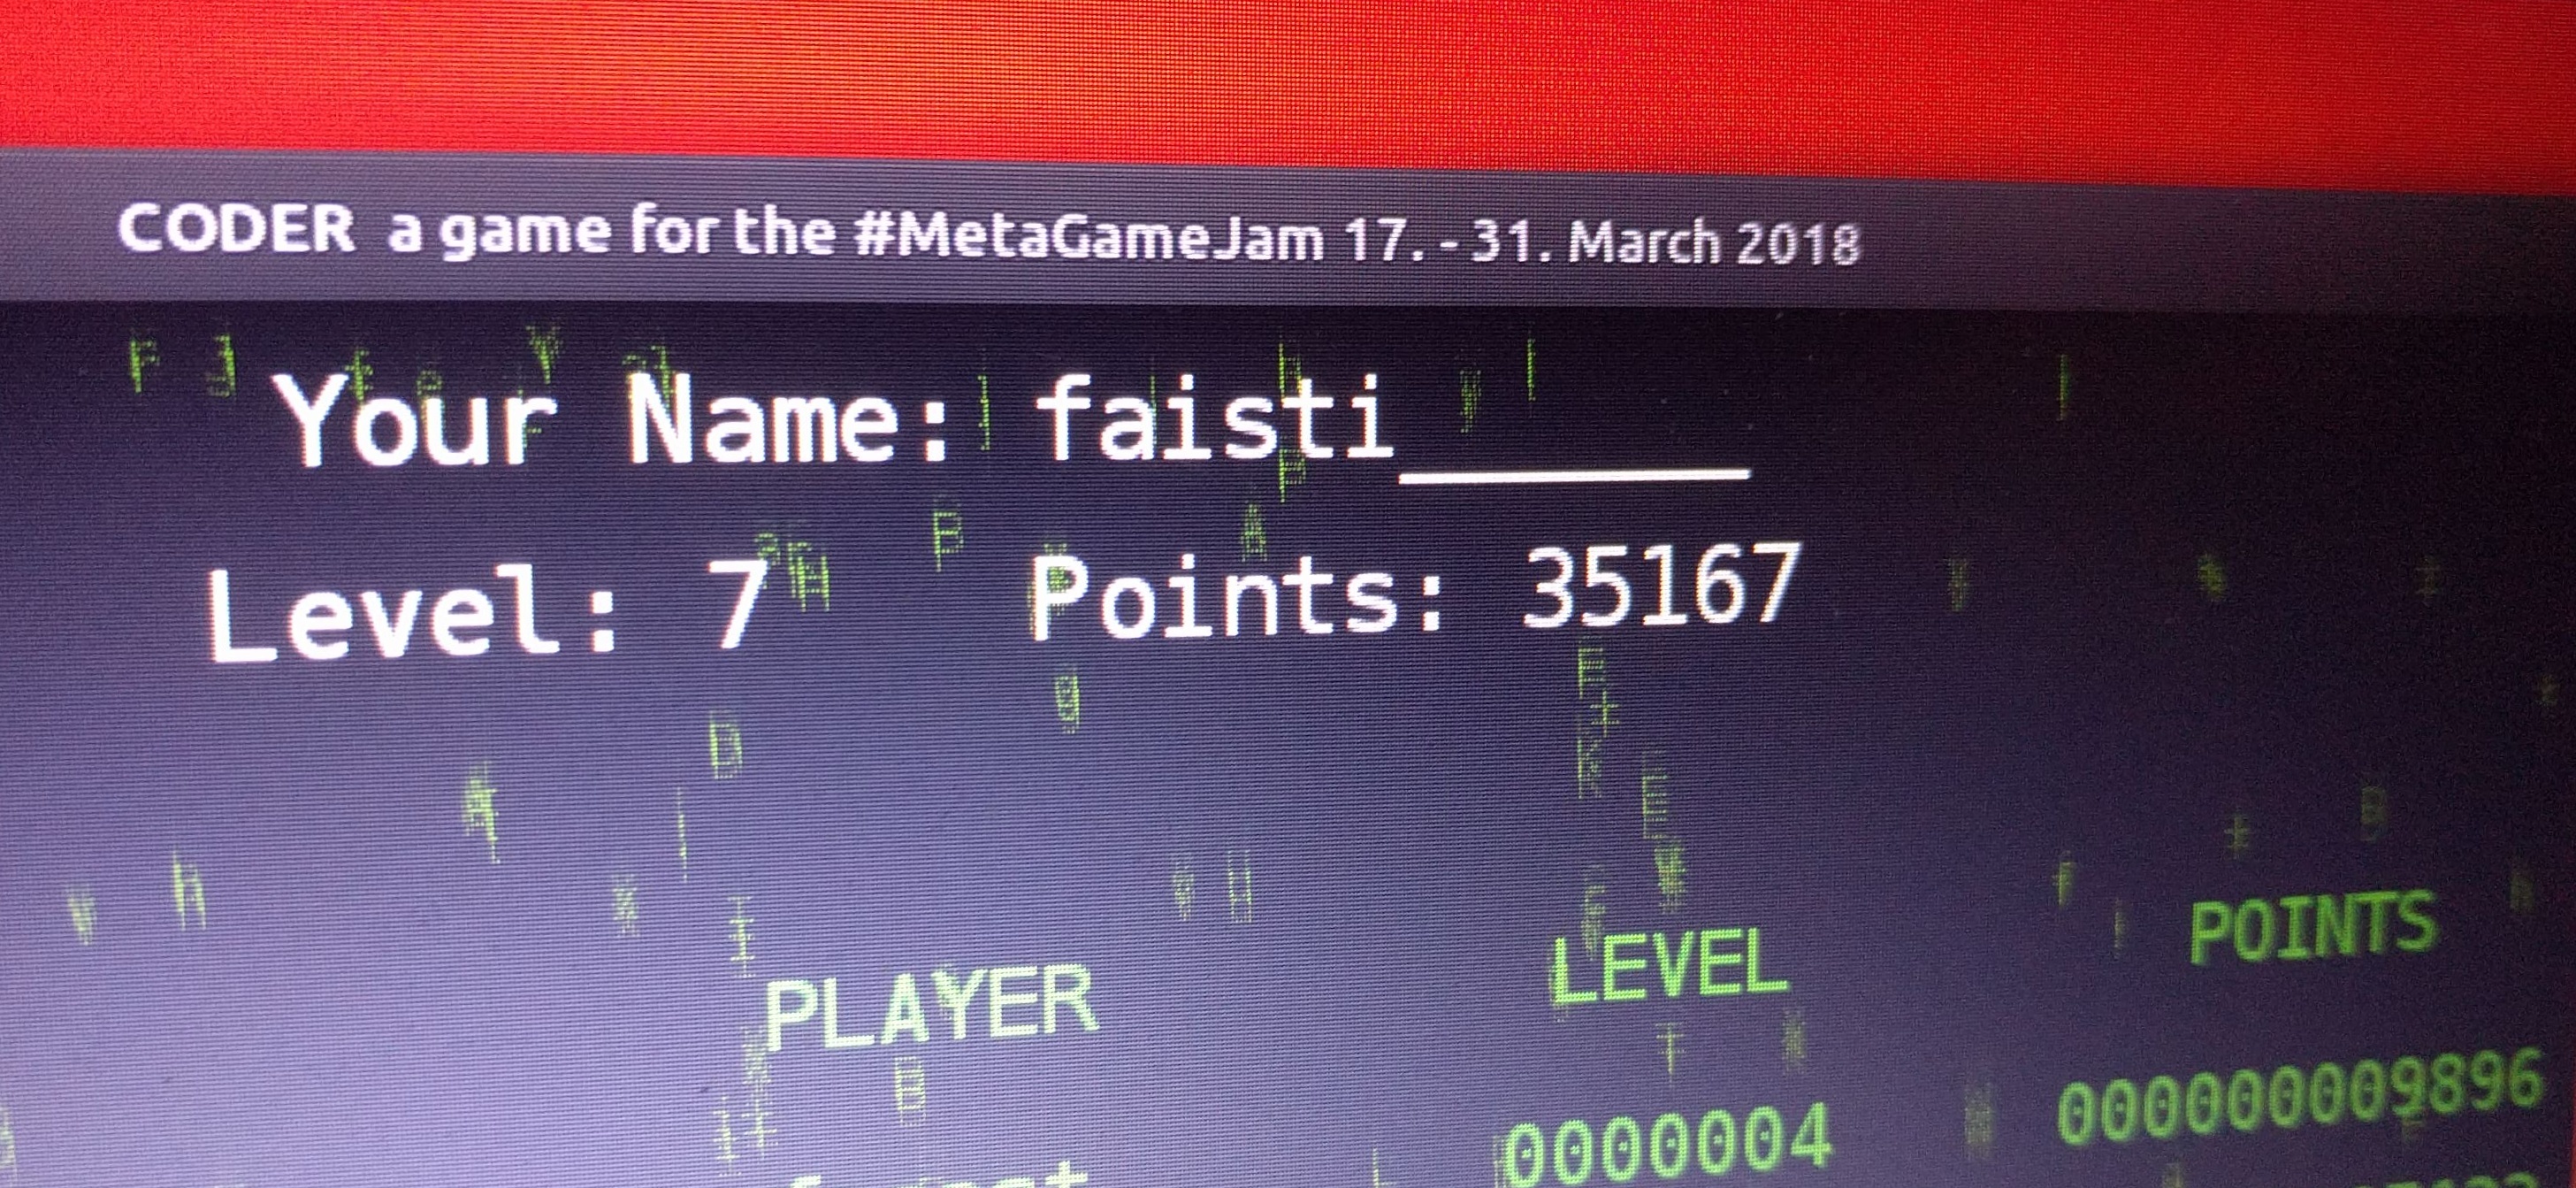 Code like me. Coding game. Game Coder программа. Meta game Jam. Points for Level of the game.